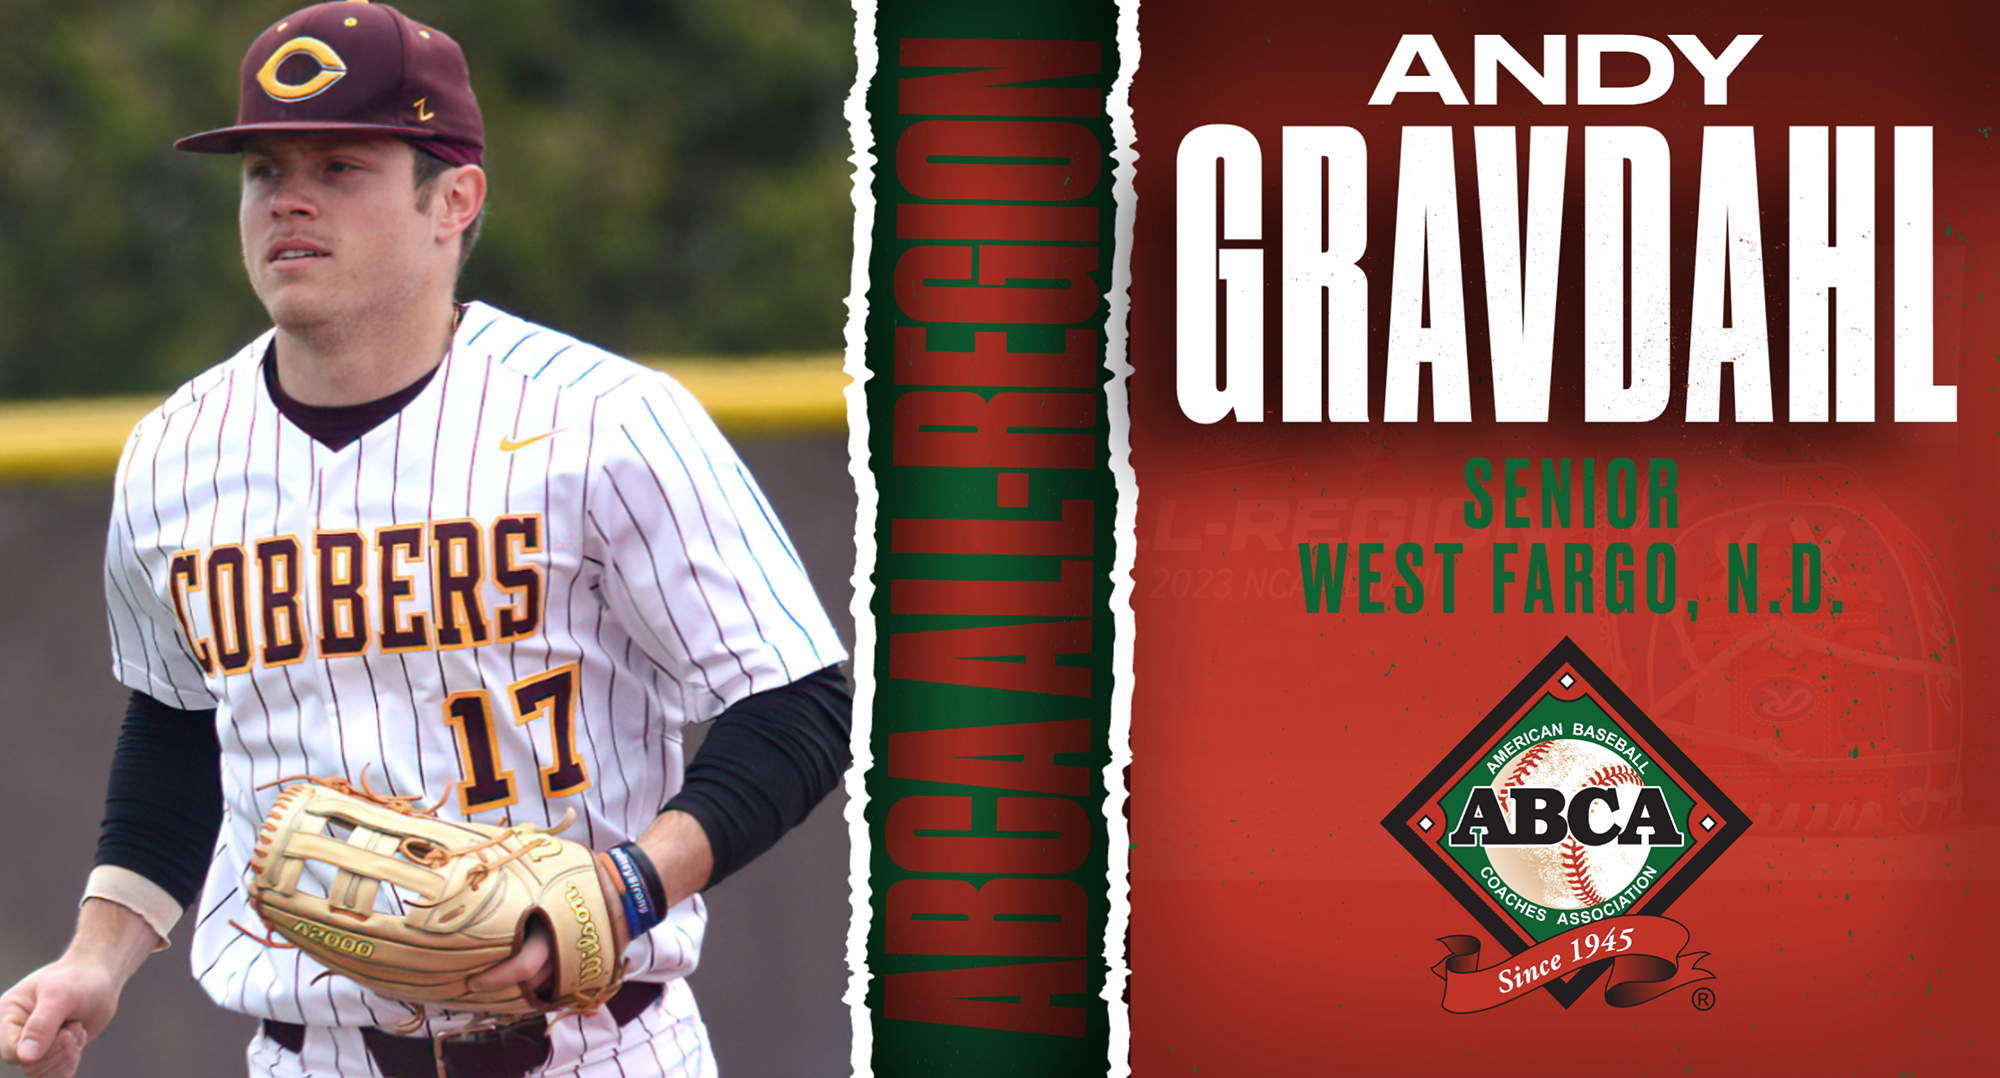 For the second straight day Andy Gravdahl earned an All-Region award as he was named to the ABCA All-Region Third Team.